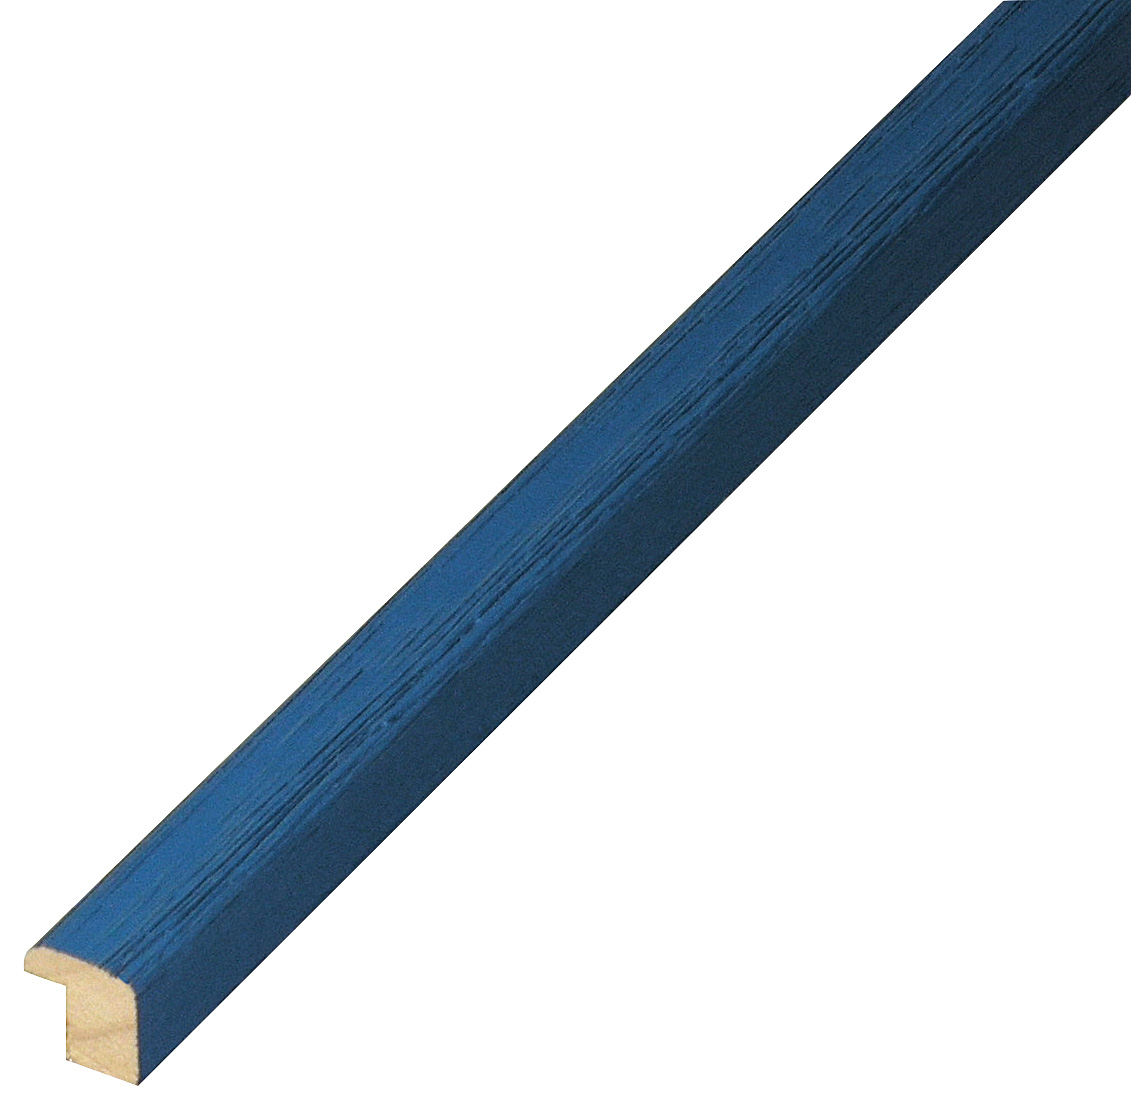 Moulding ayous woodworm treated mm 13x13 - scratched finish - Blue - 311BLU